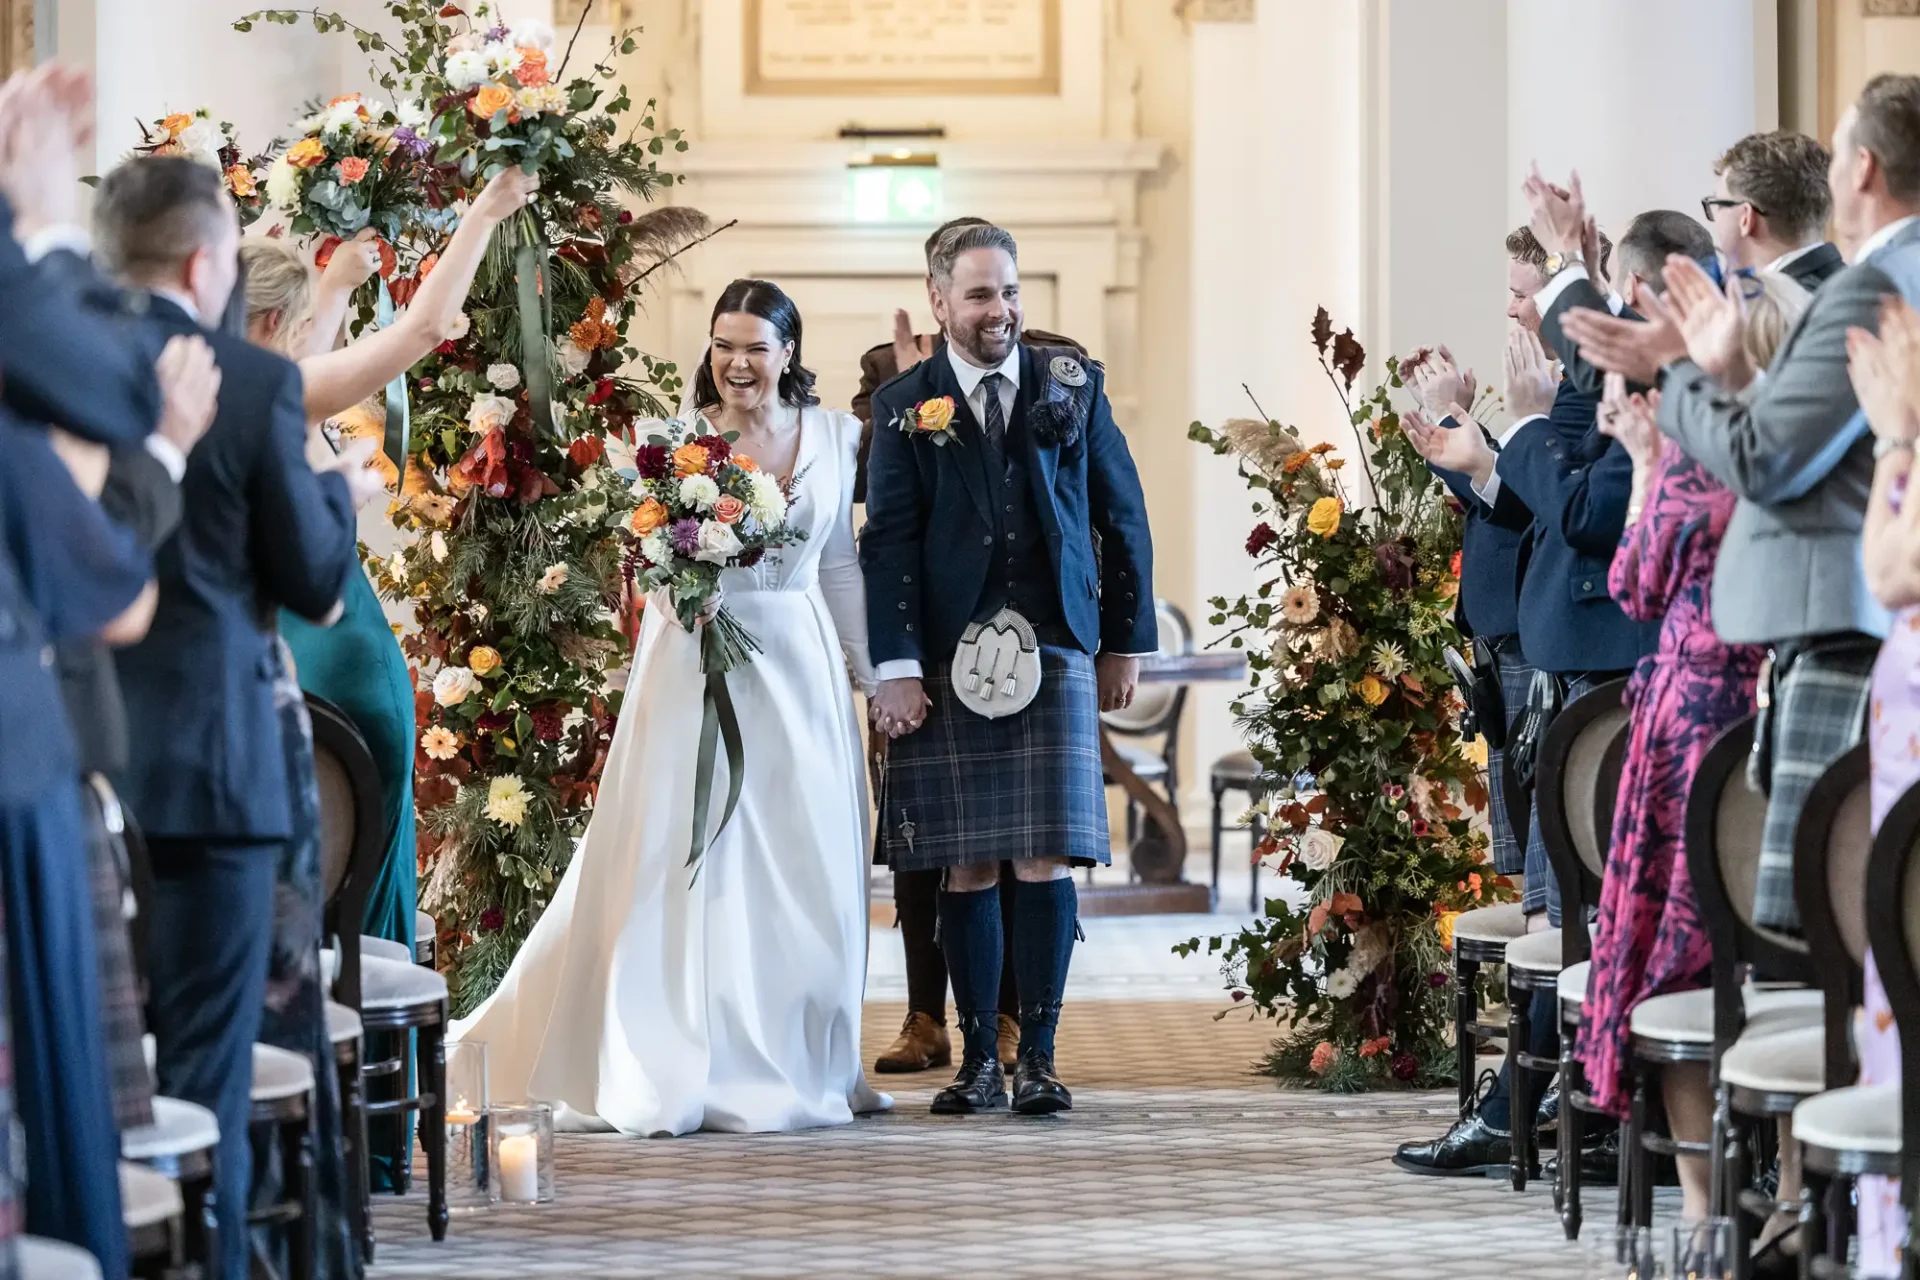 A joyful bride and groom walk down the aisle, receiving applause from guests, inside a decorated venue with floral archways. the groom wears a kilt.